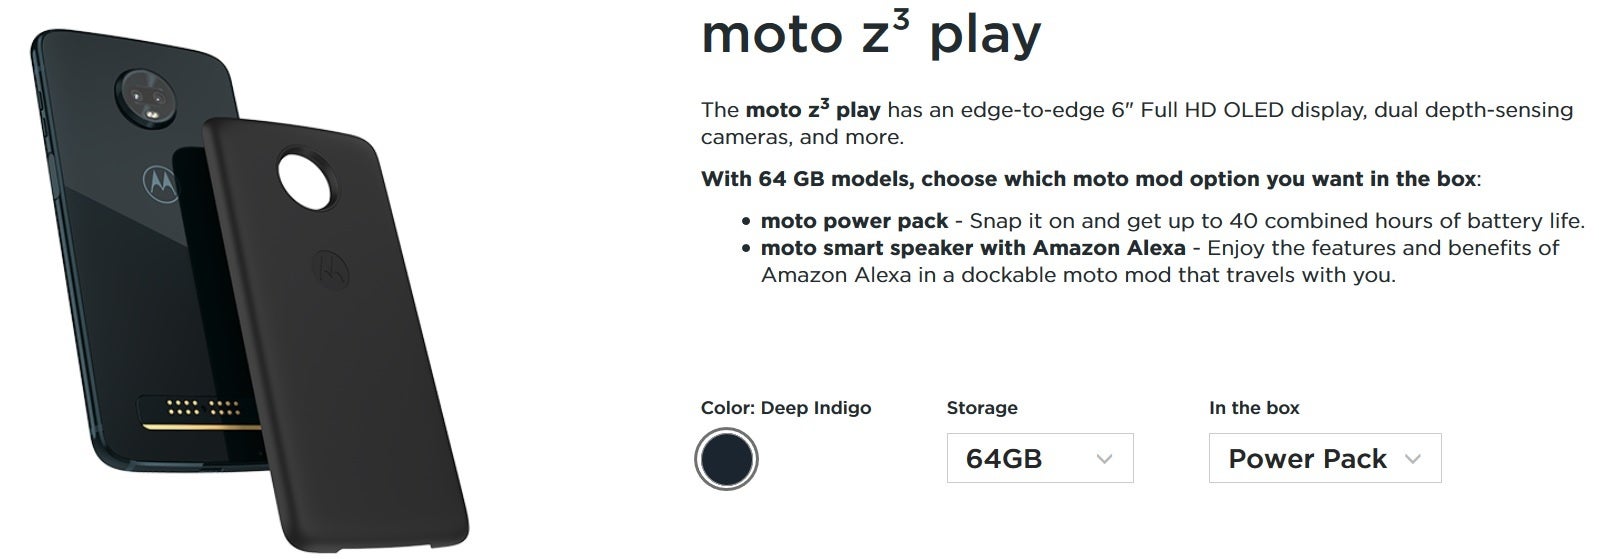 Save $250 or 45% on this Moto Z3 Play bundle - Motorola&#039;s bundle deal takes a whopping 45% off the 64GB Moto Z3 Play and the Alexa Moto Mod